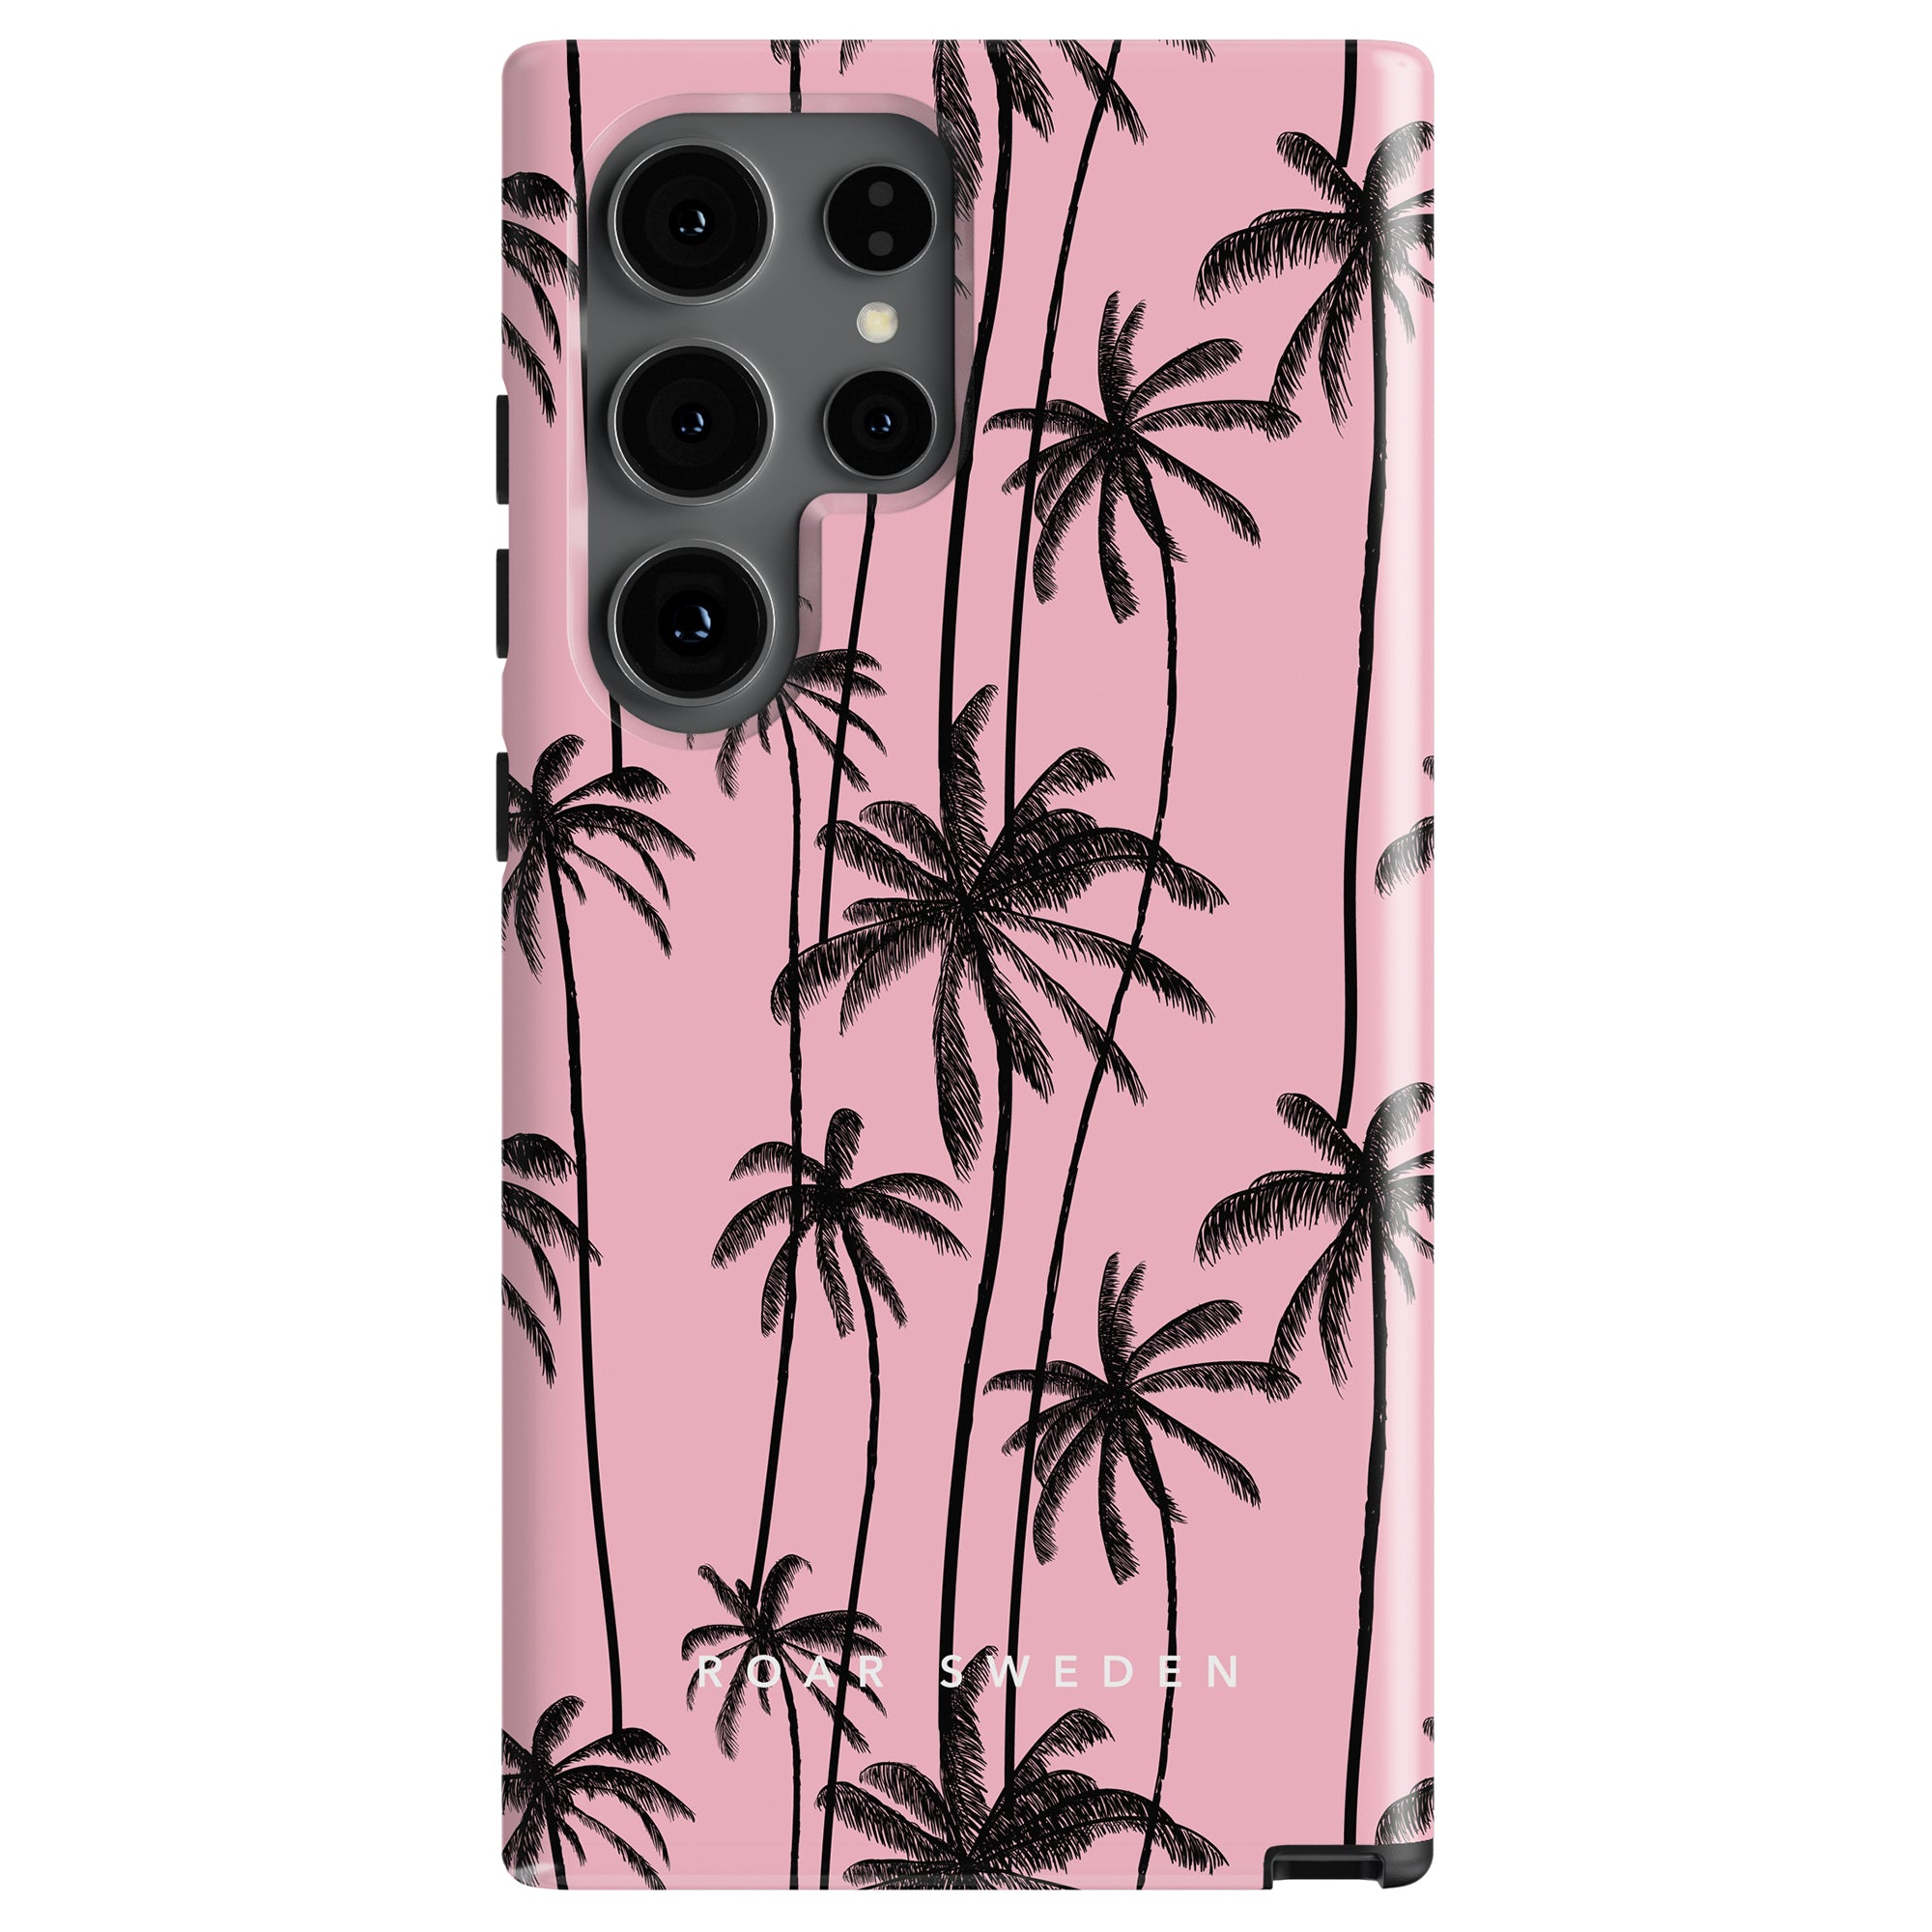 A Pink Palms - Tough case with a black palm tree design, featuring a cutout for a multi-lens camera.